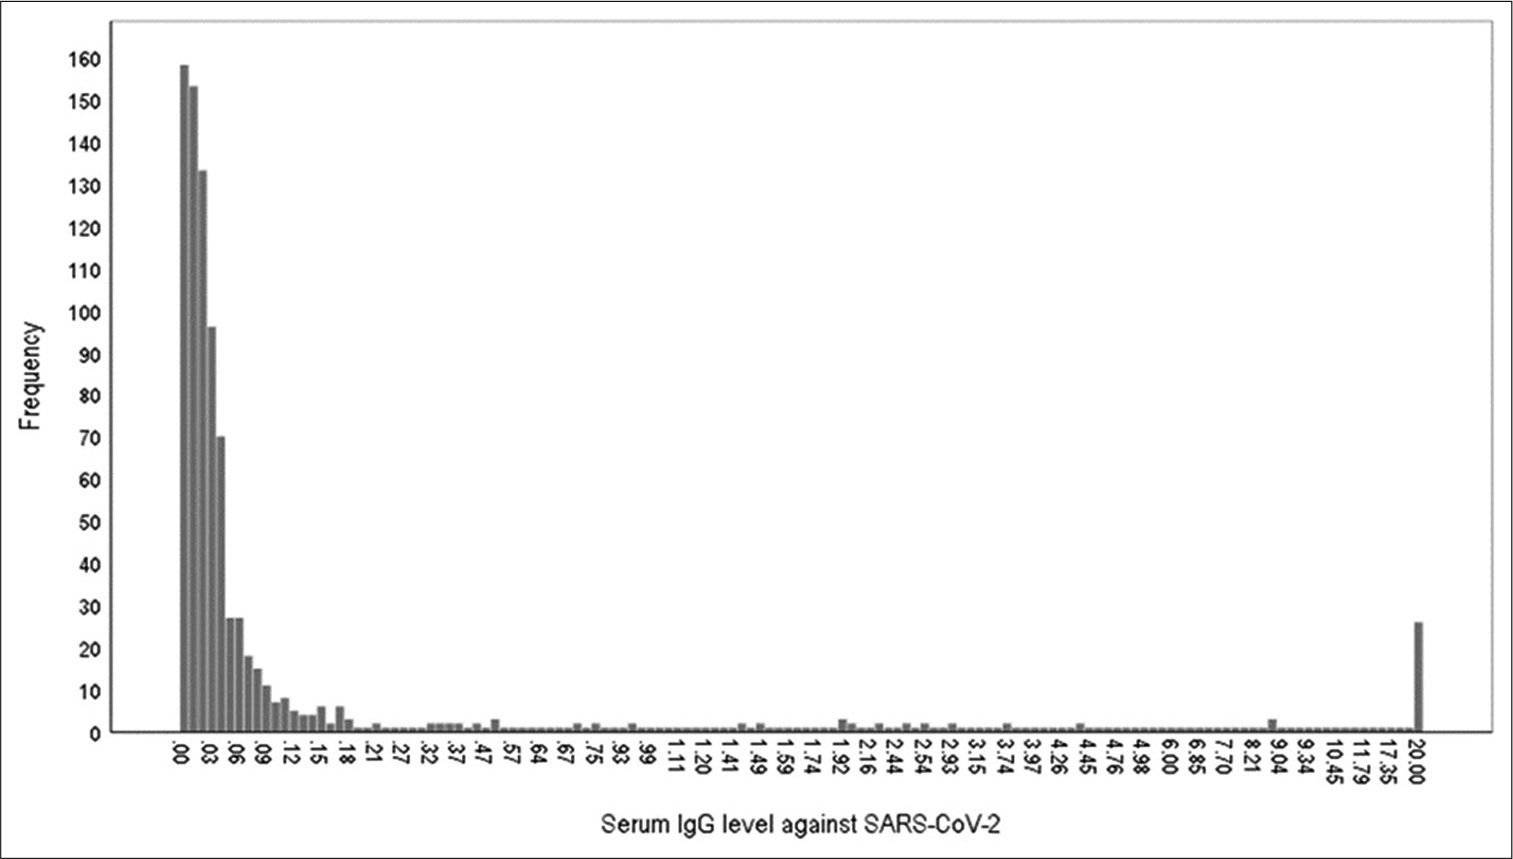 Bar chart showing the distribution of healthcare workers as per their serum IgG response against SARS-CoV-2: (n=919).